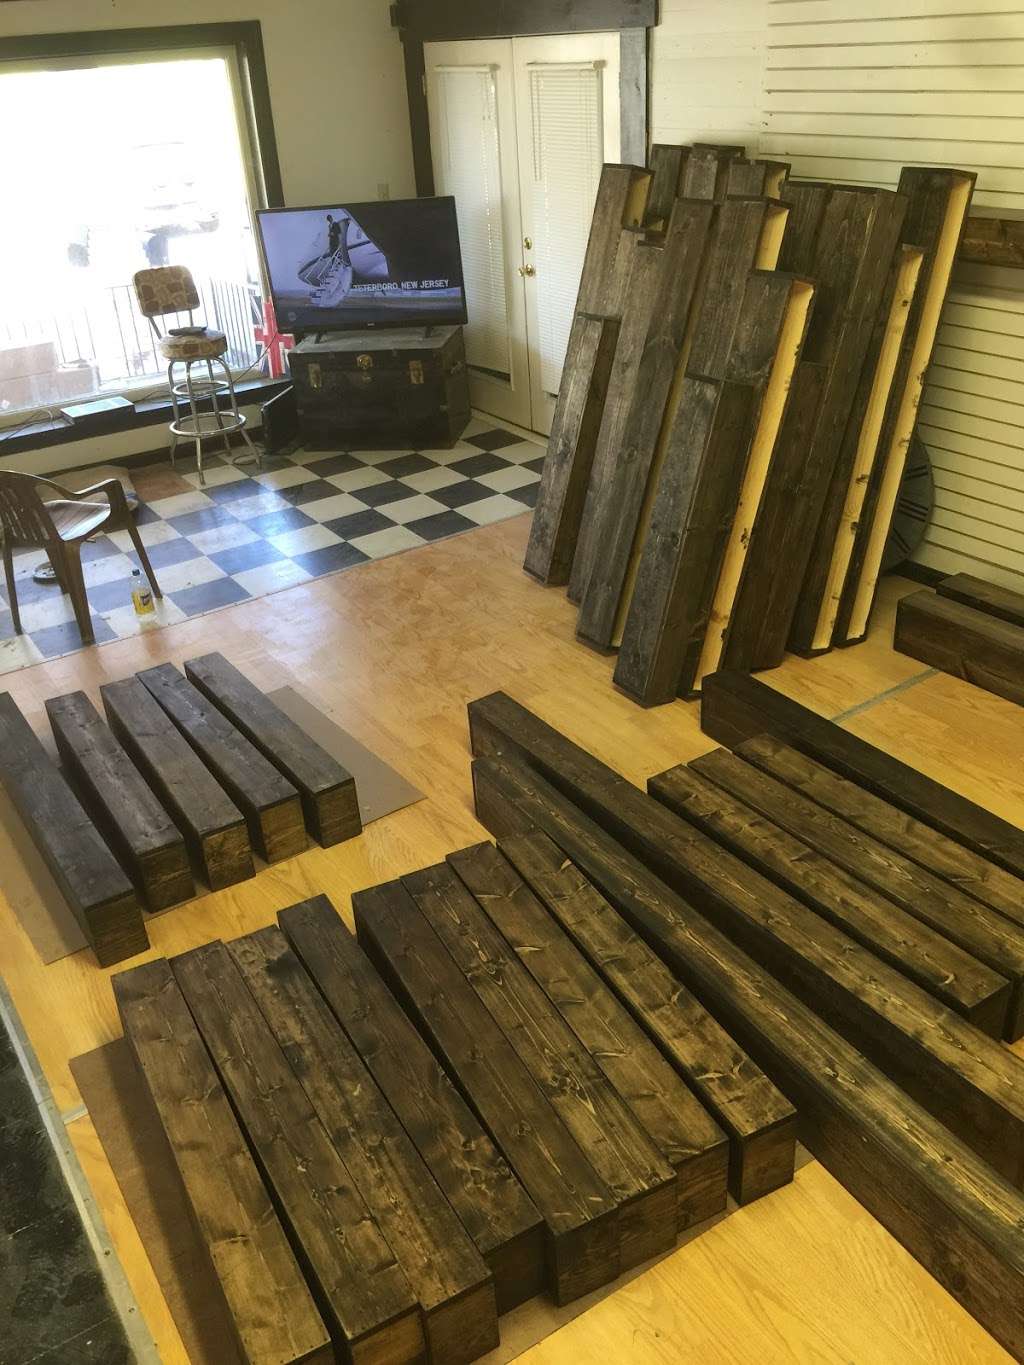 Essex Hand Crafted Wood Products | 14828 Lee Hwy, Amissville, VA 20106 | Phone: (540) 333-4937